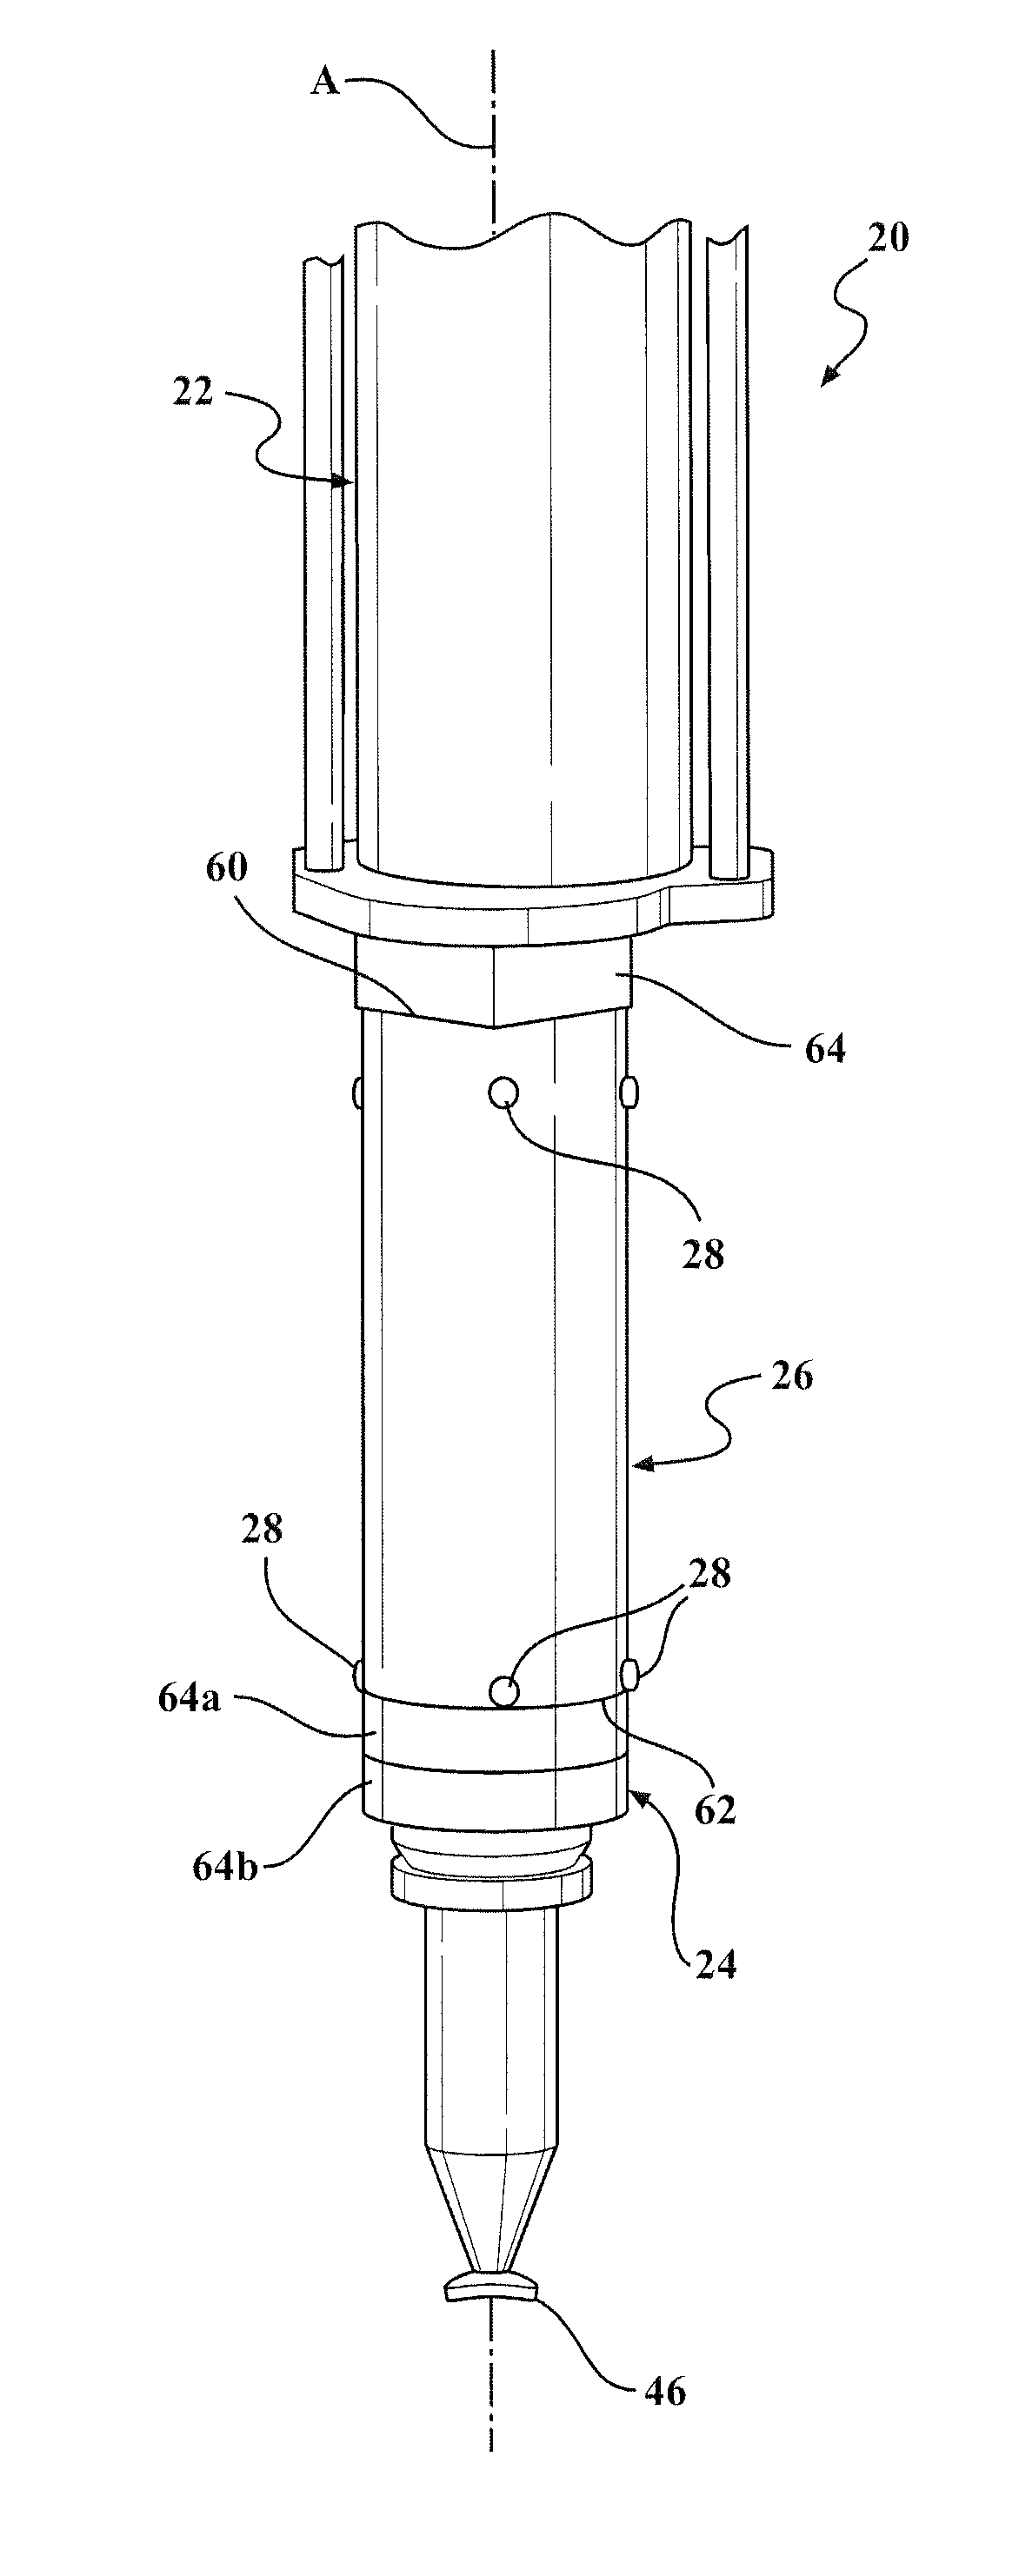 High voltage connection sealing method for corona ignition coil